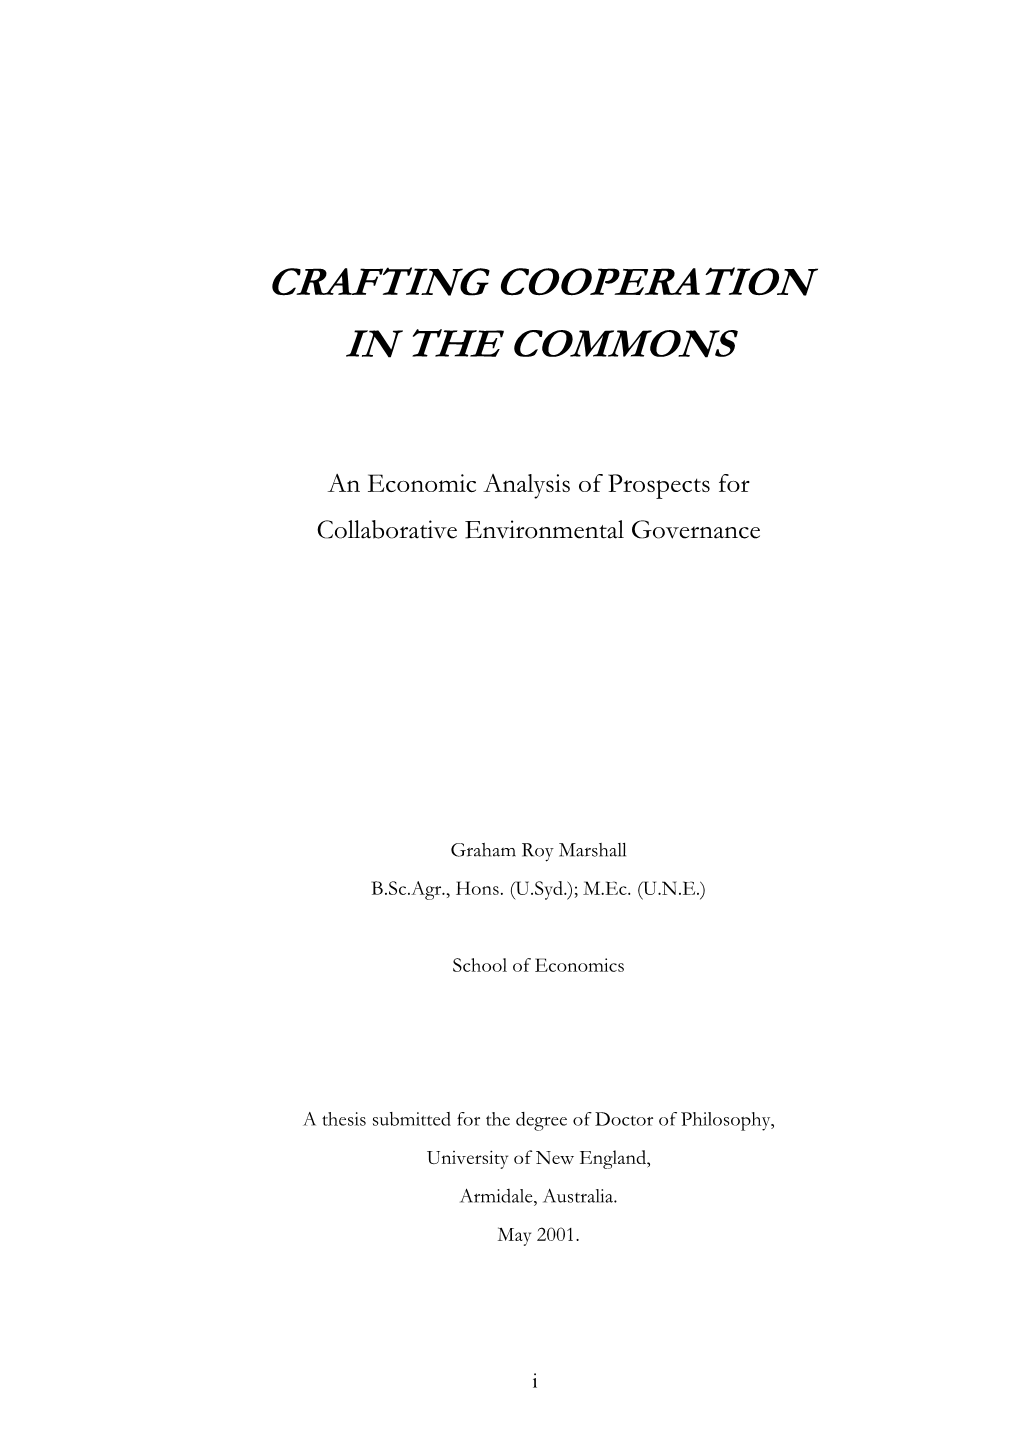 Crafting Cooperation in the Commons